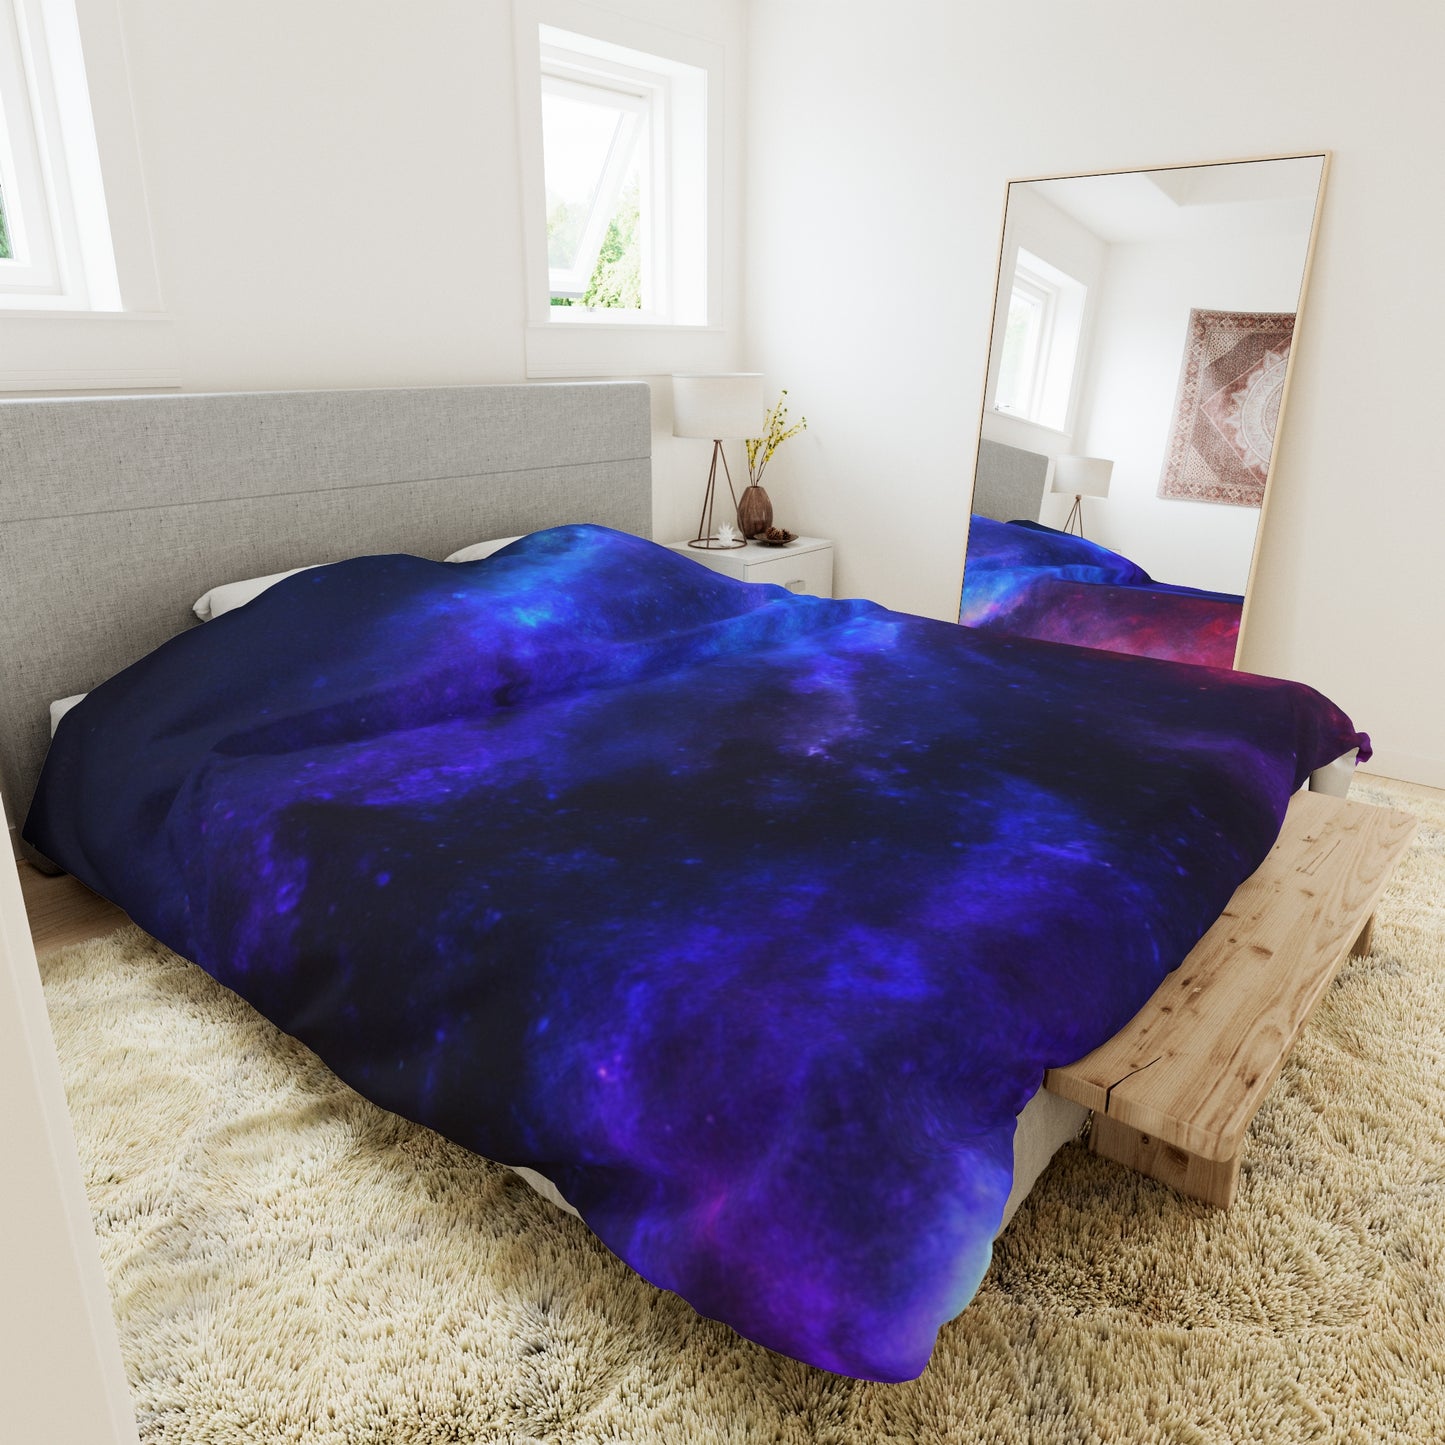 Dreamy Dolores - Astronomy Duvet Bed Cover